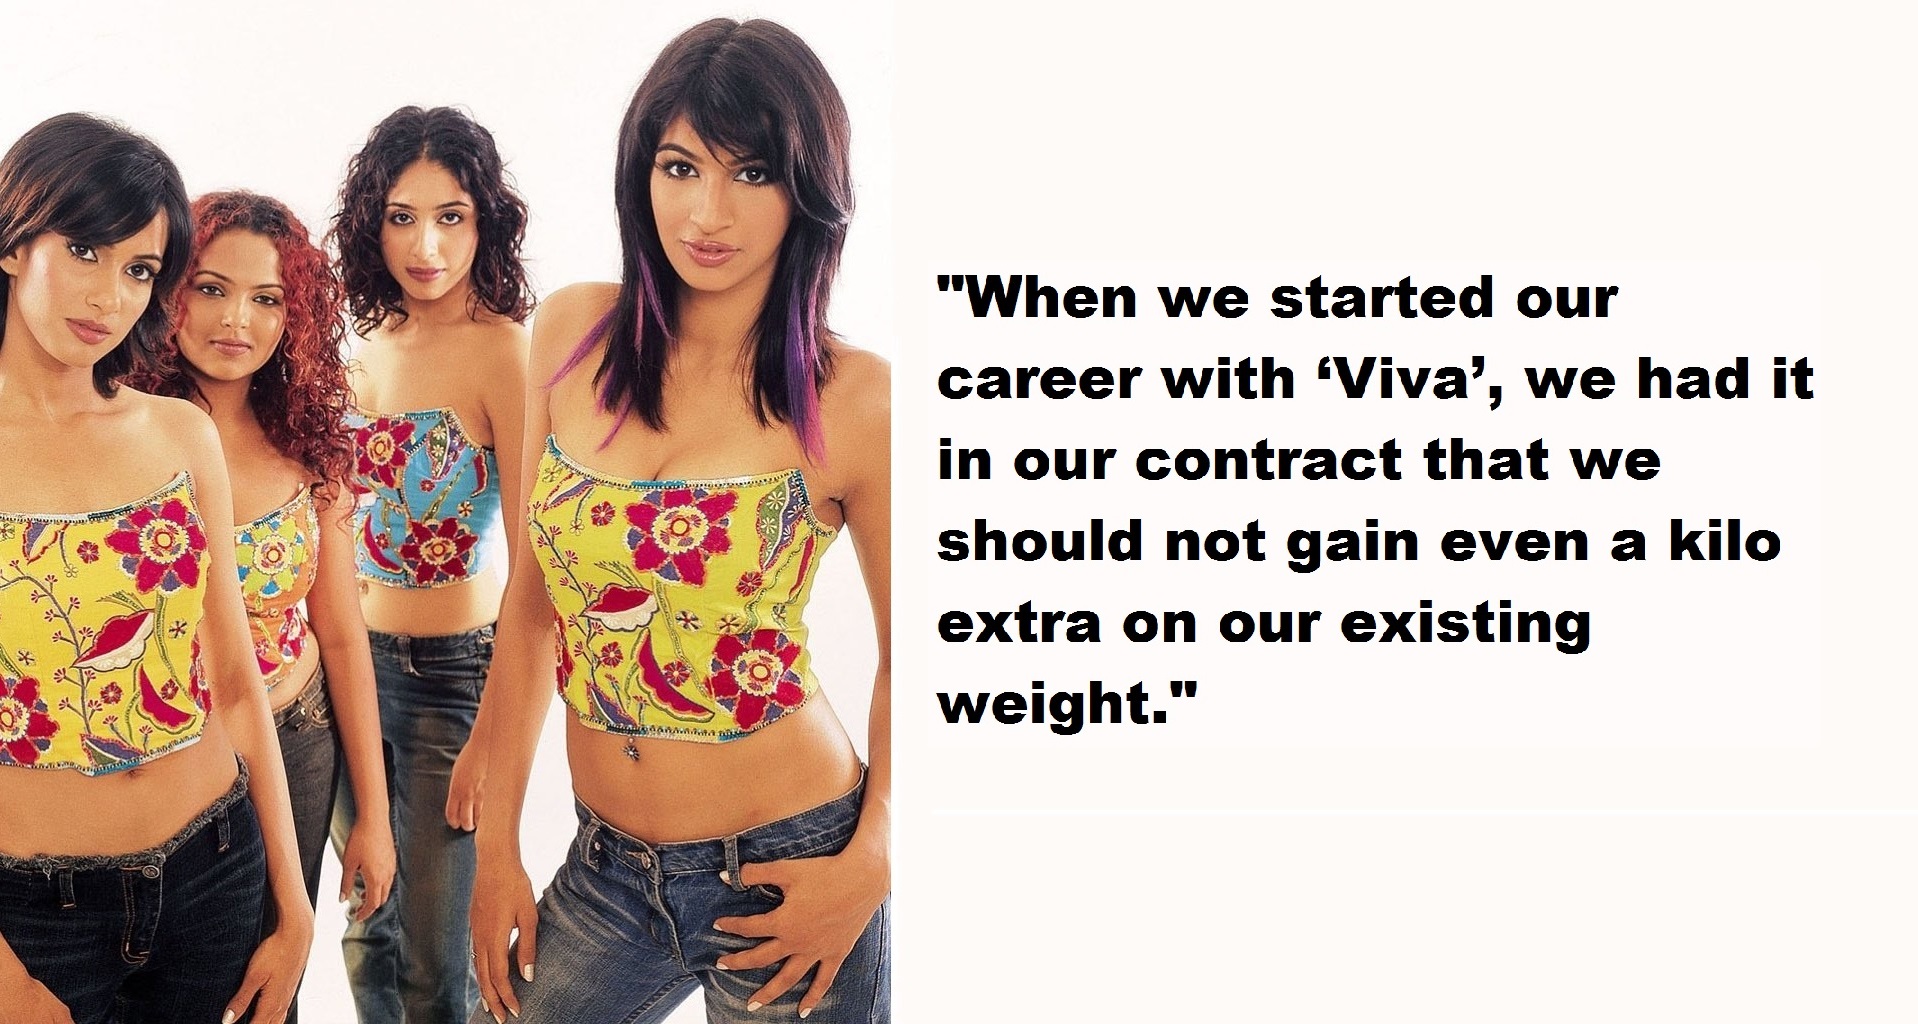 VIVA Singer Neha Bhasin Says The Girl Group’s “Contract Said Not To Gain Even A Kilo Of Weight”